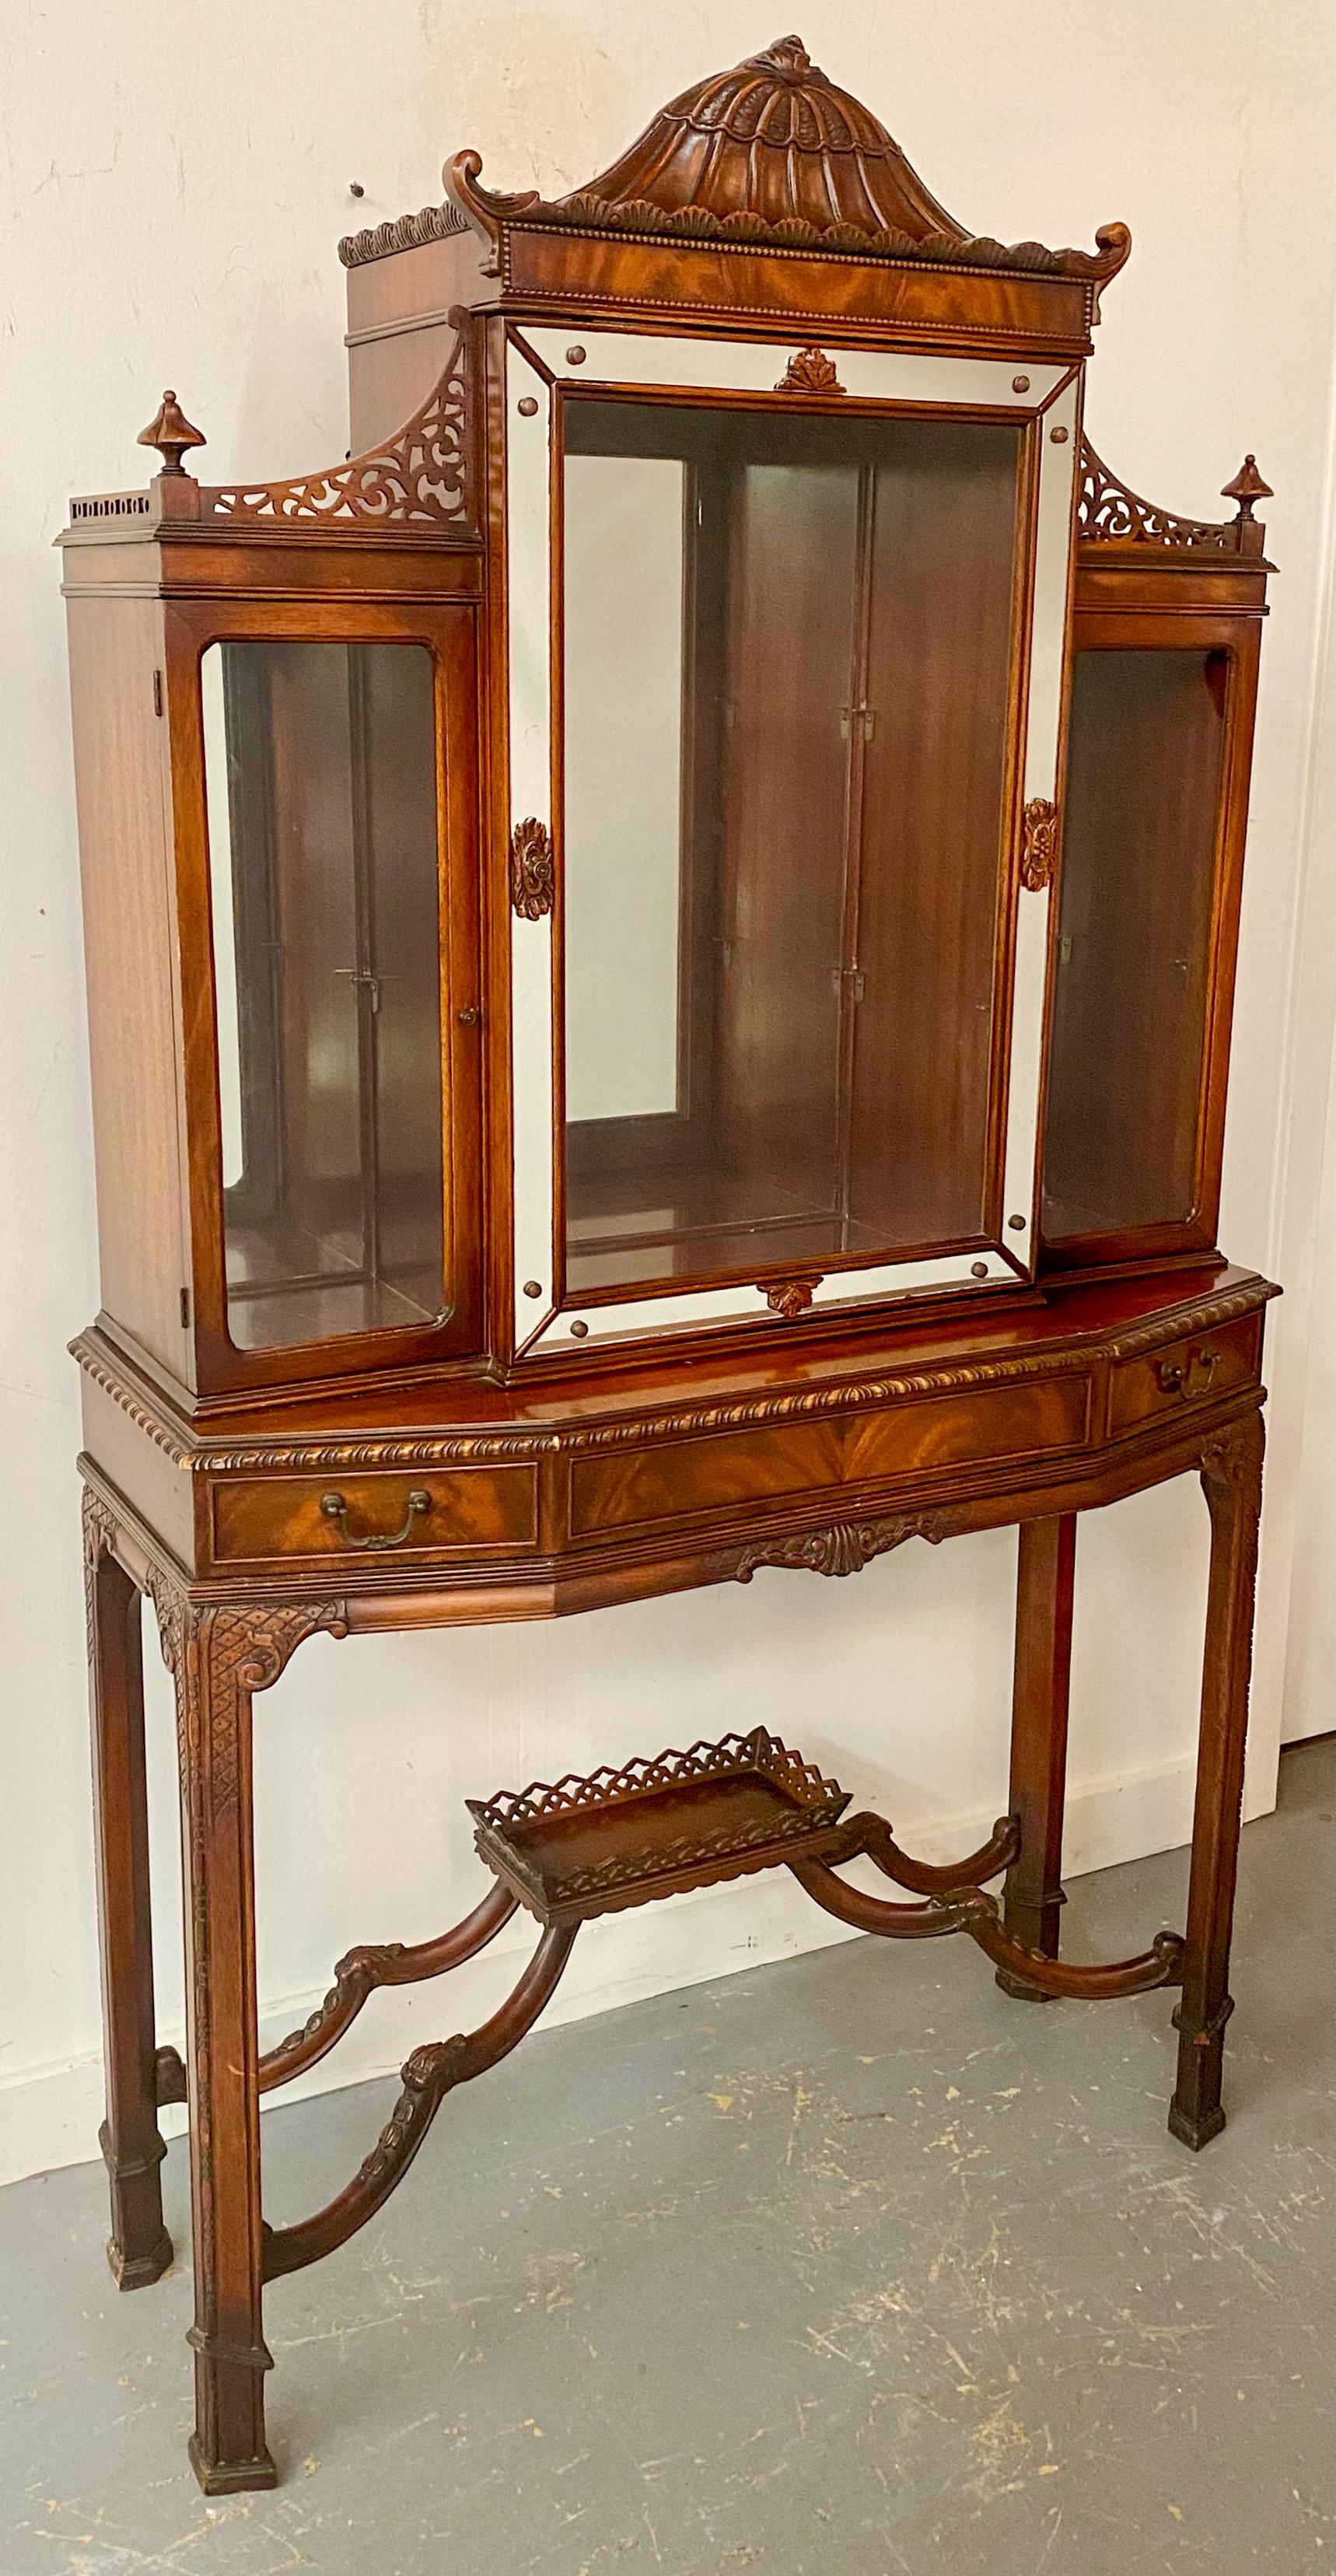 The two-piece Chinese Chippendale style Vitrine, cabinet or secretary desk  shows fine and quality carving design.  Made of mahogany wood, the Chinese chippendale style vitrine features three doors, the center one is the largest having mirrored